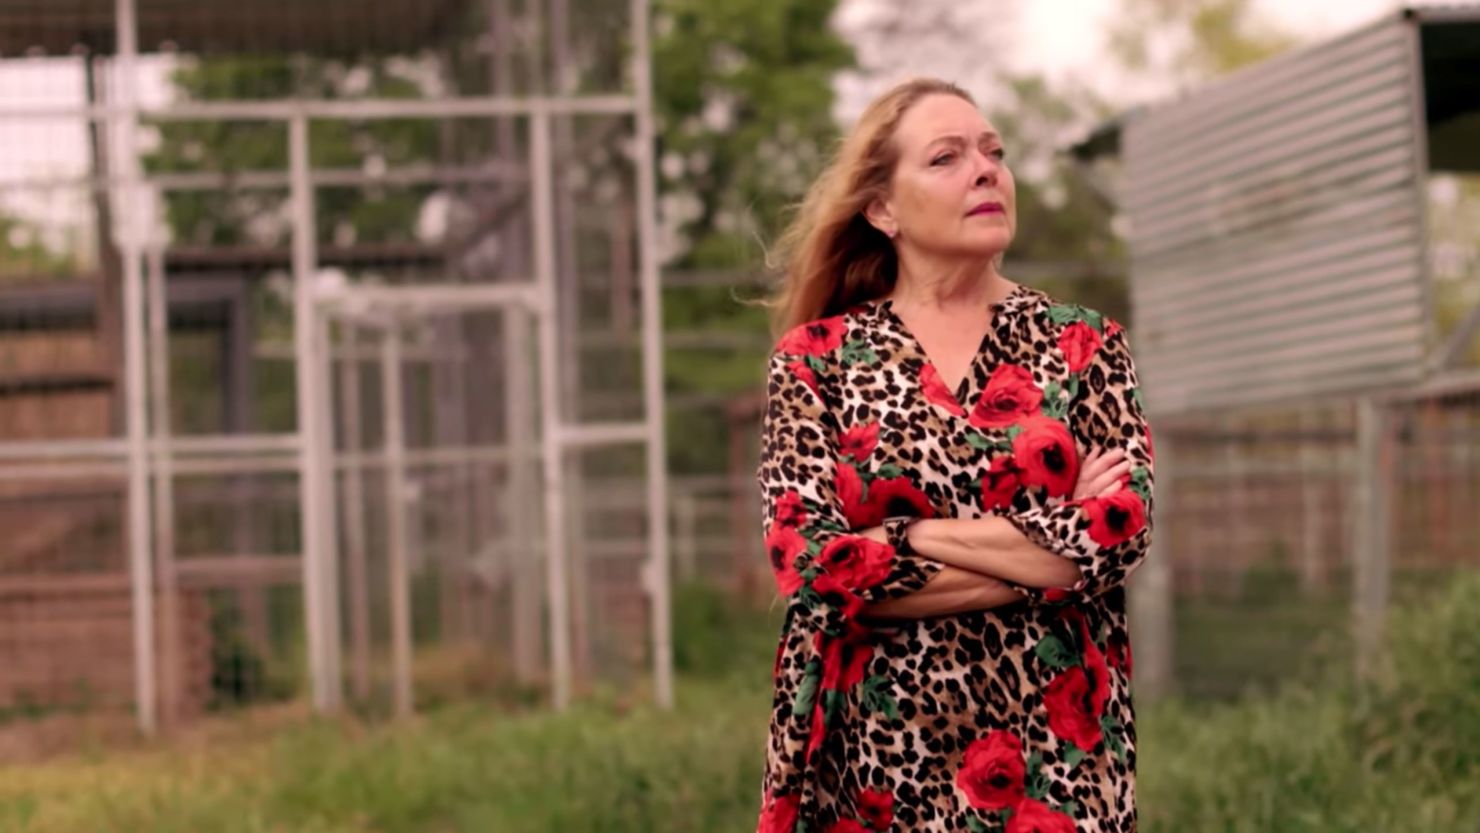 Carole Baskin is continuing her battle to protect big cats in "Carole Baskin's Cage Fight." 